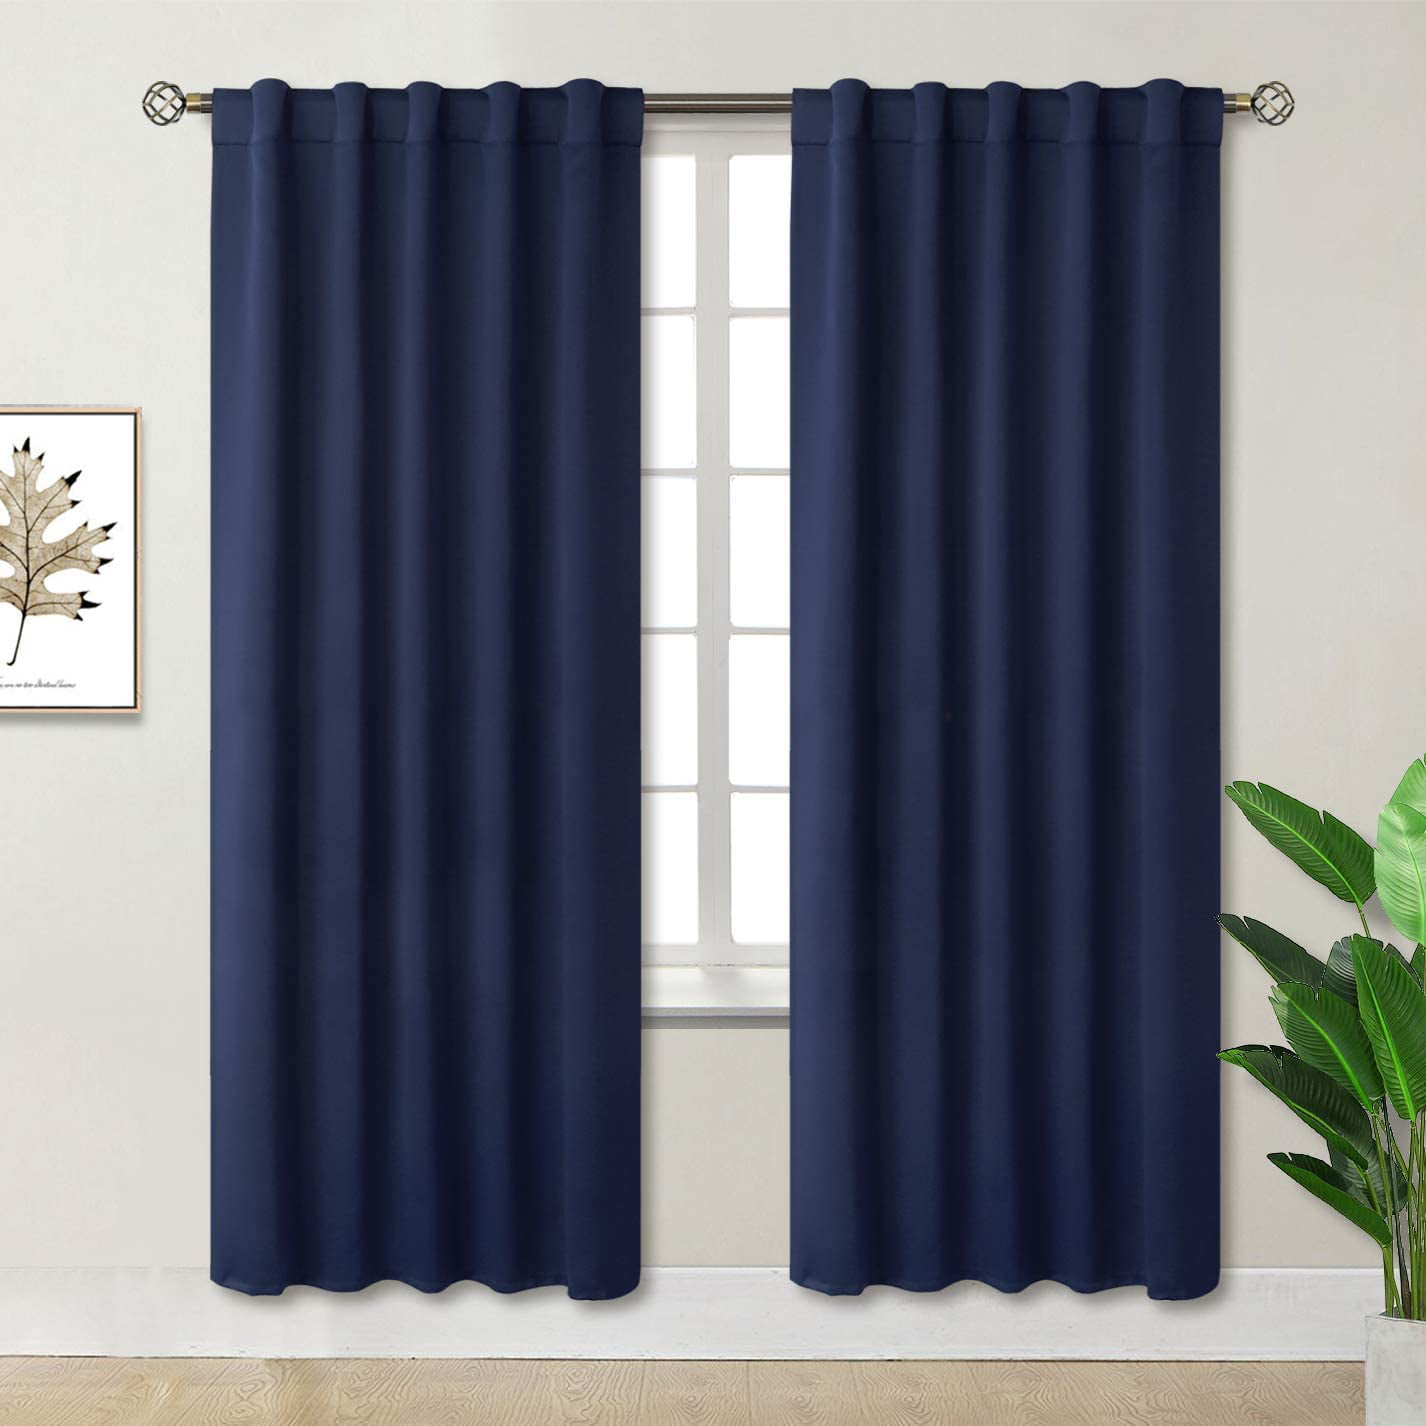 Summer Sandy Beach Blackout Door Window Curtains Thermal Insulated Panels Drapes 